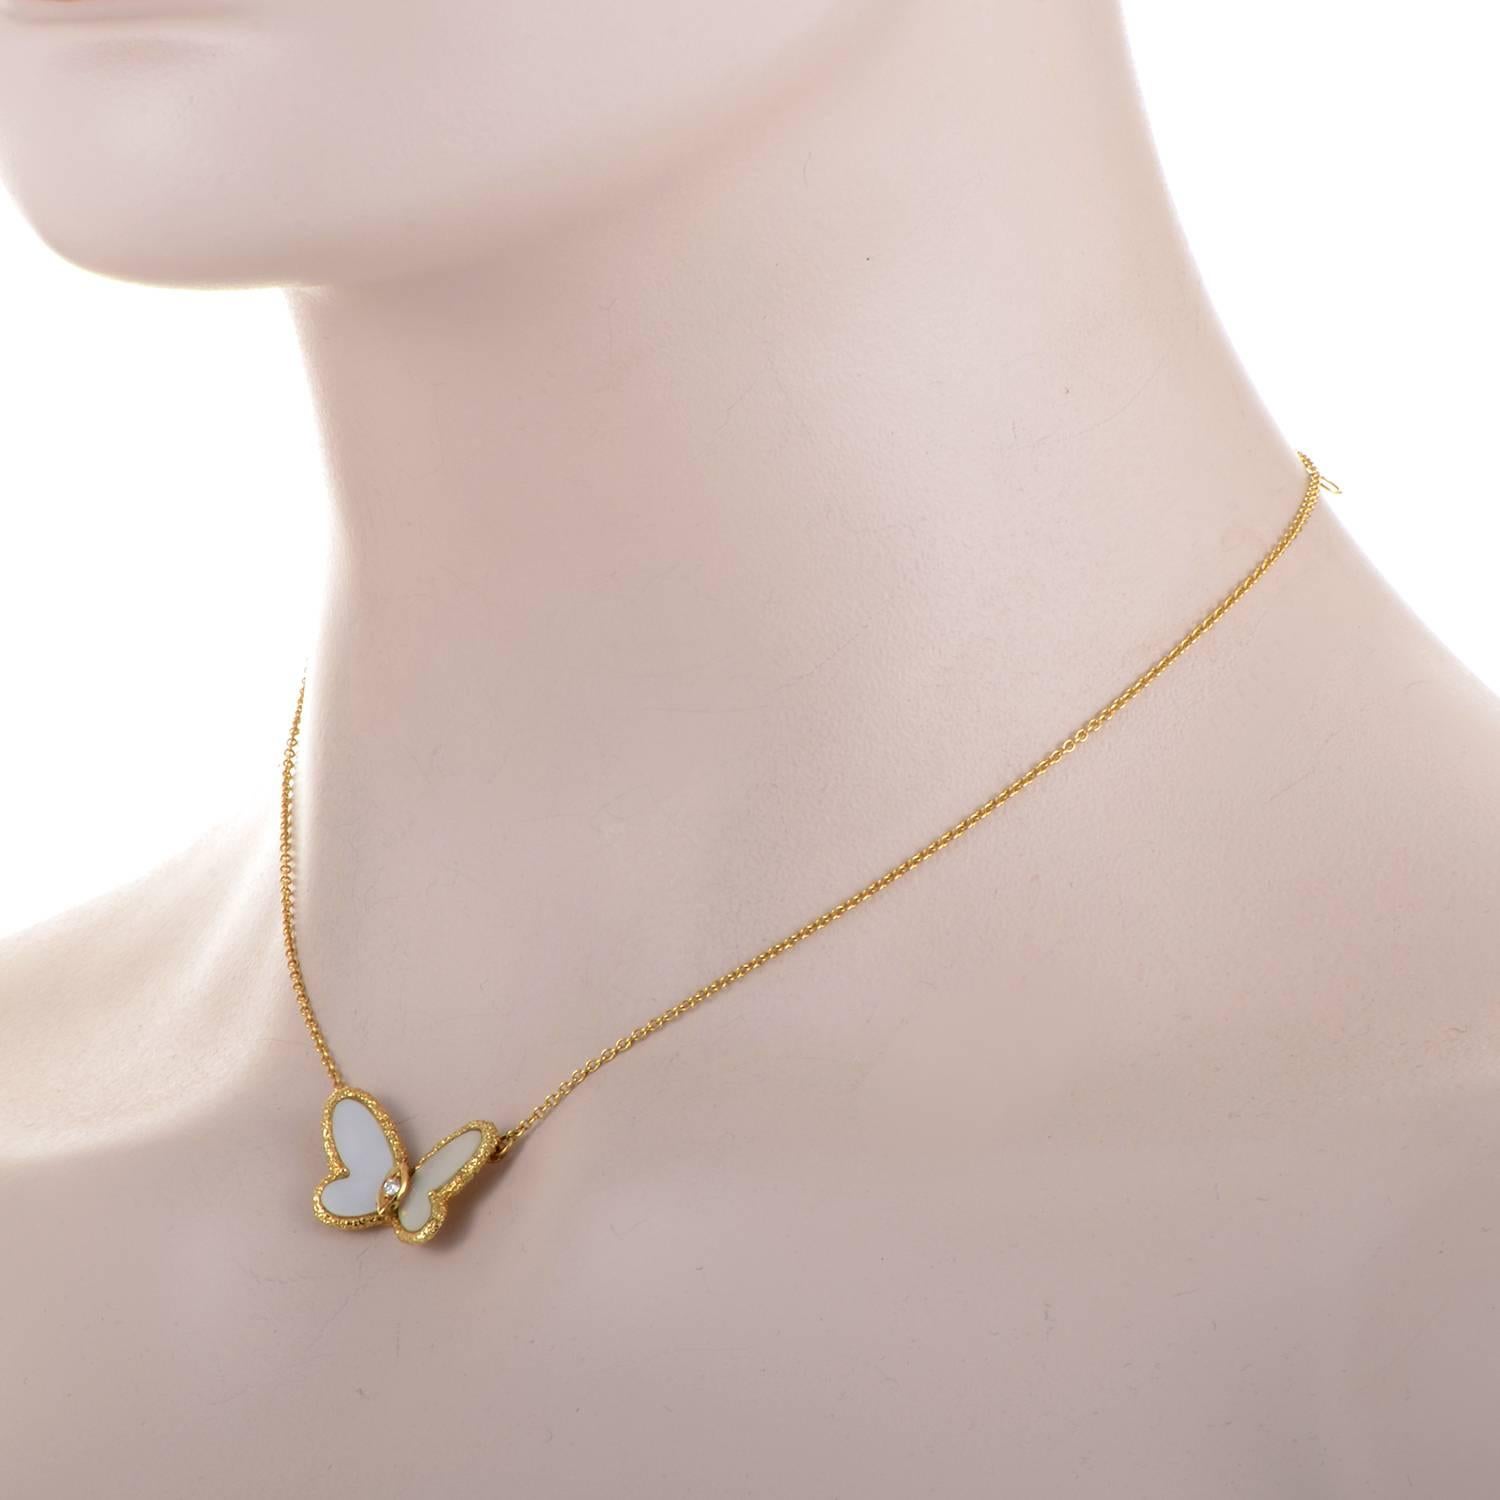 Opening its delightful mother of pearl wings to reveal a precious diamond, the enchanting butterfly pendant in this compelling 18K yellow gold necklace from Van Cleef & Arpels offers an adorable appeal in elegant fashion.
Approximate Dimensions: